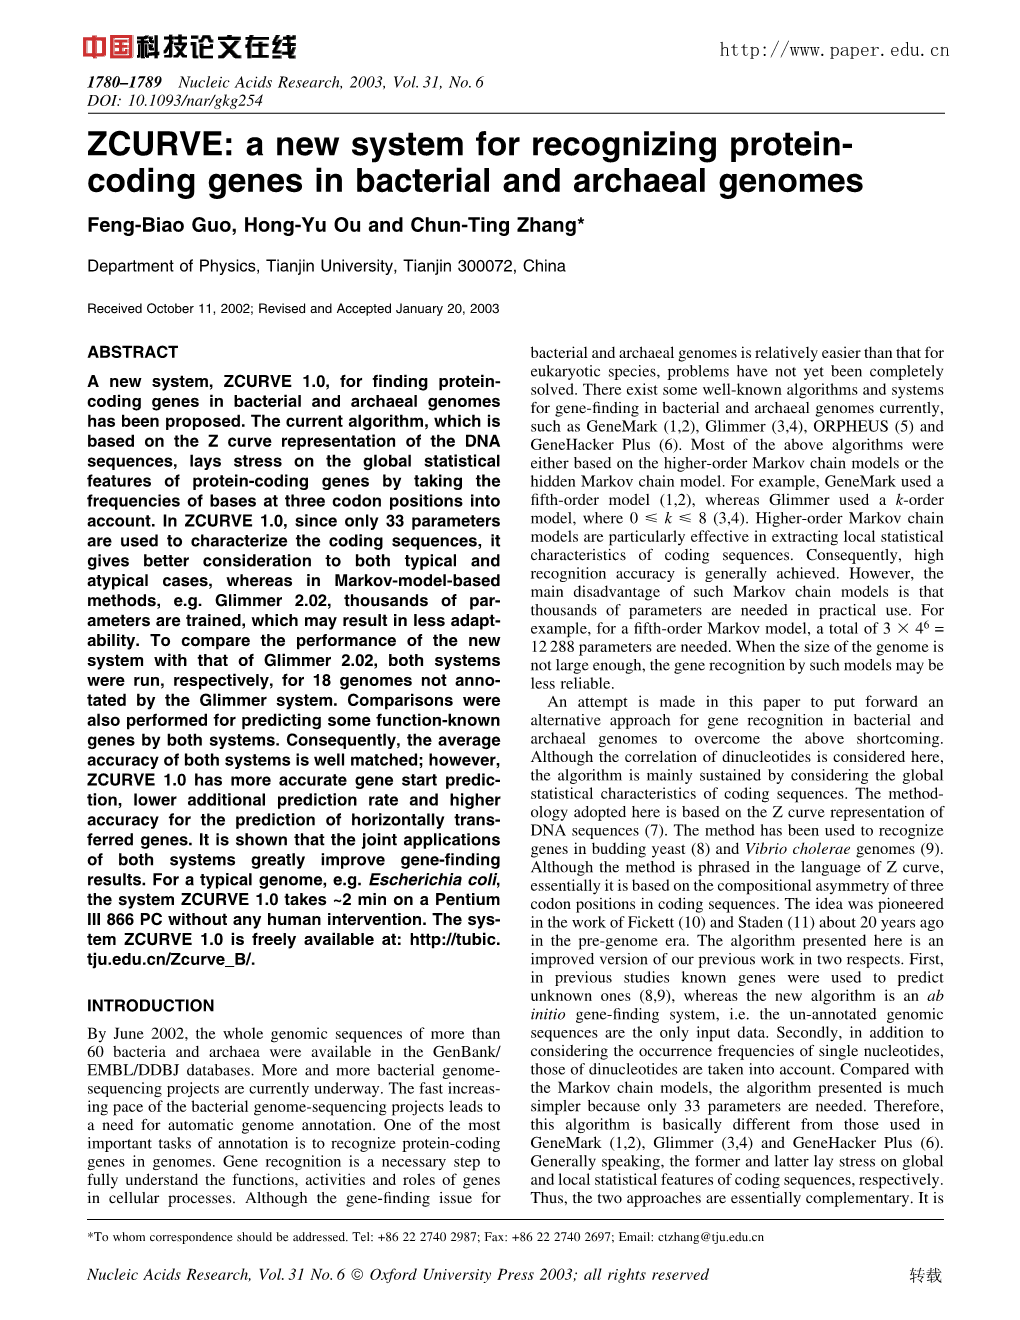 Coding Genes in Bacterial and Archaeal Genomes